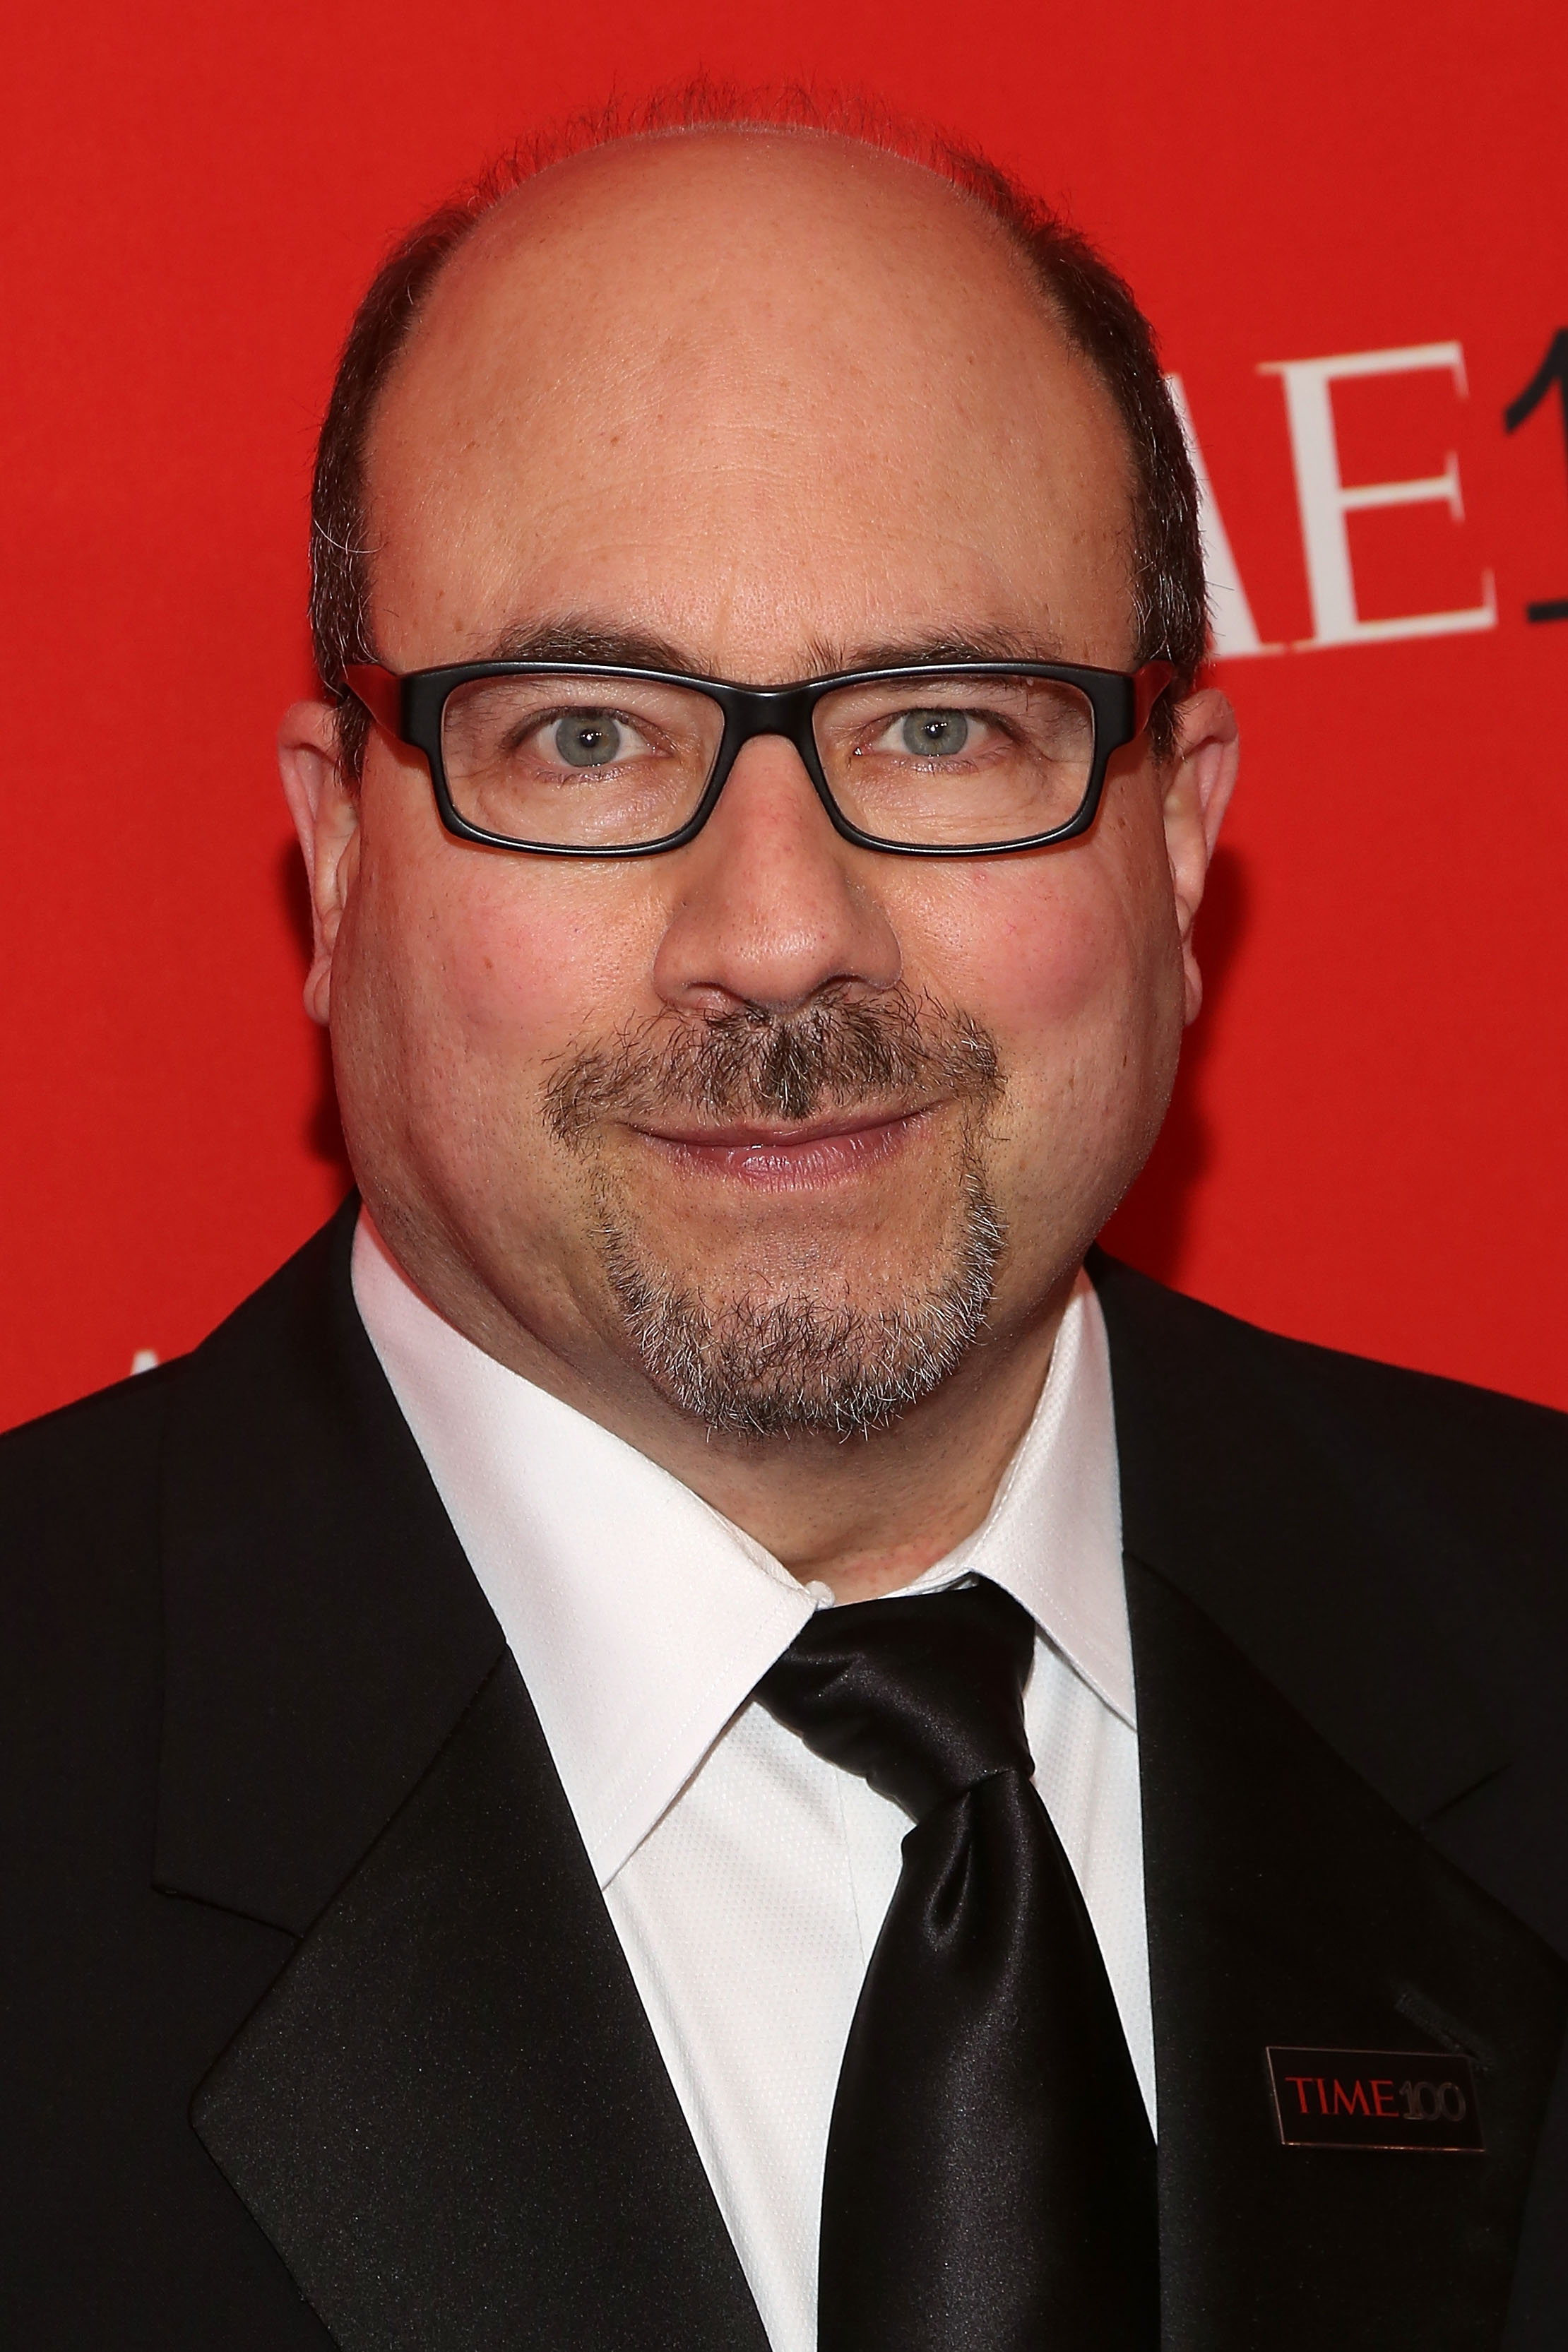 Craig Newmark at the 2015 TIME 100 Gala in New York City on April 21, 2015.